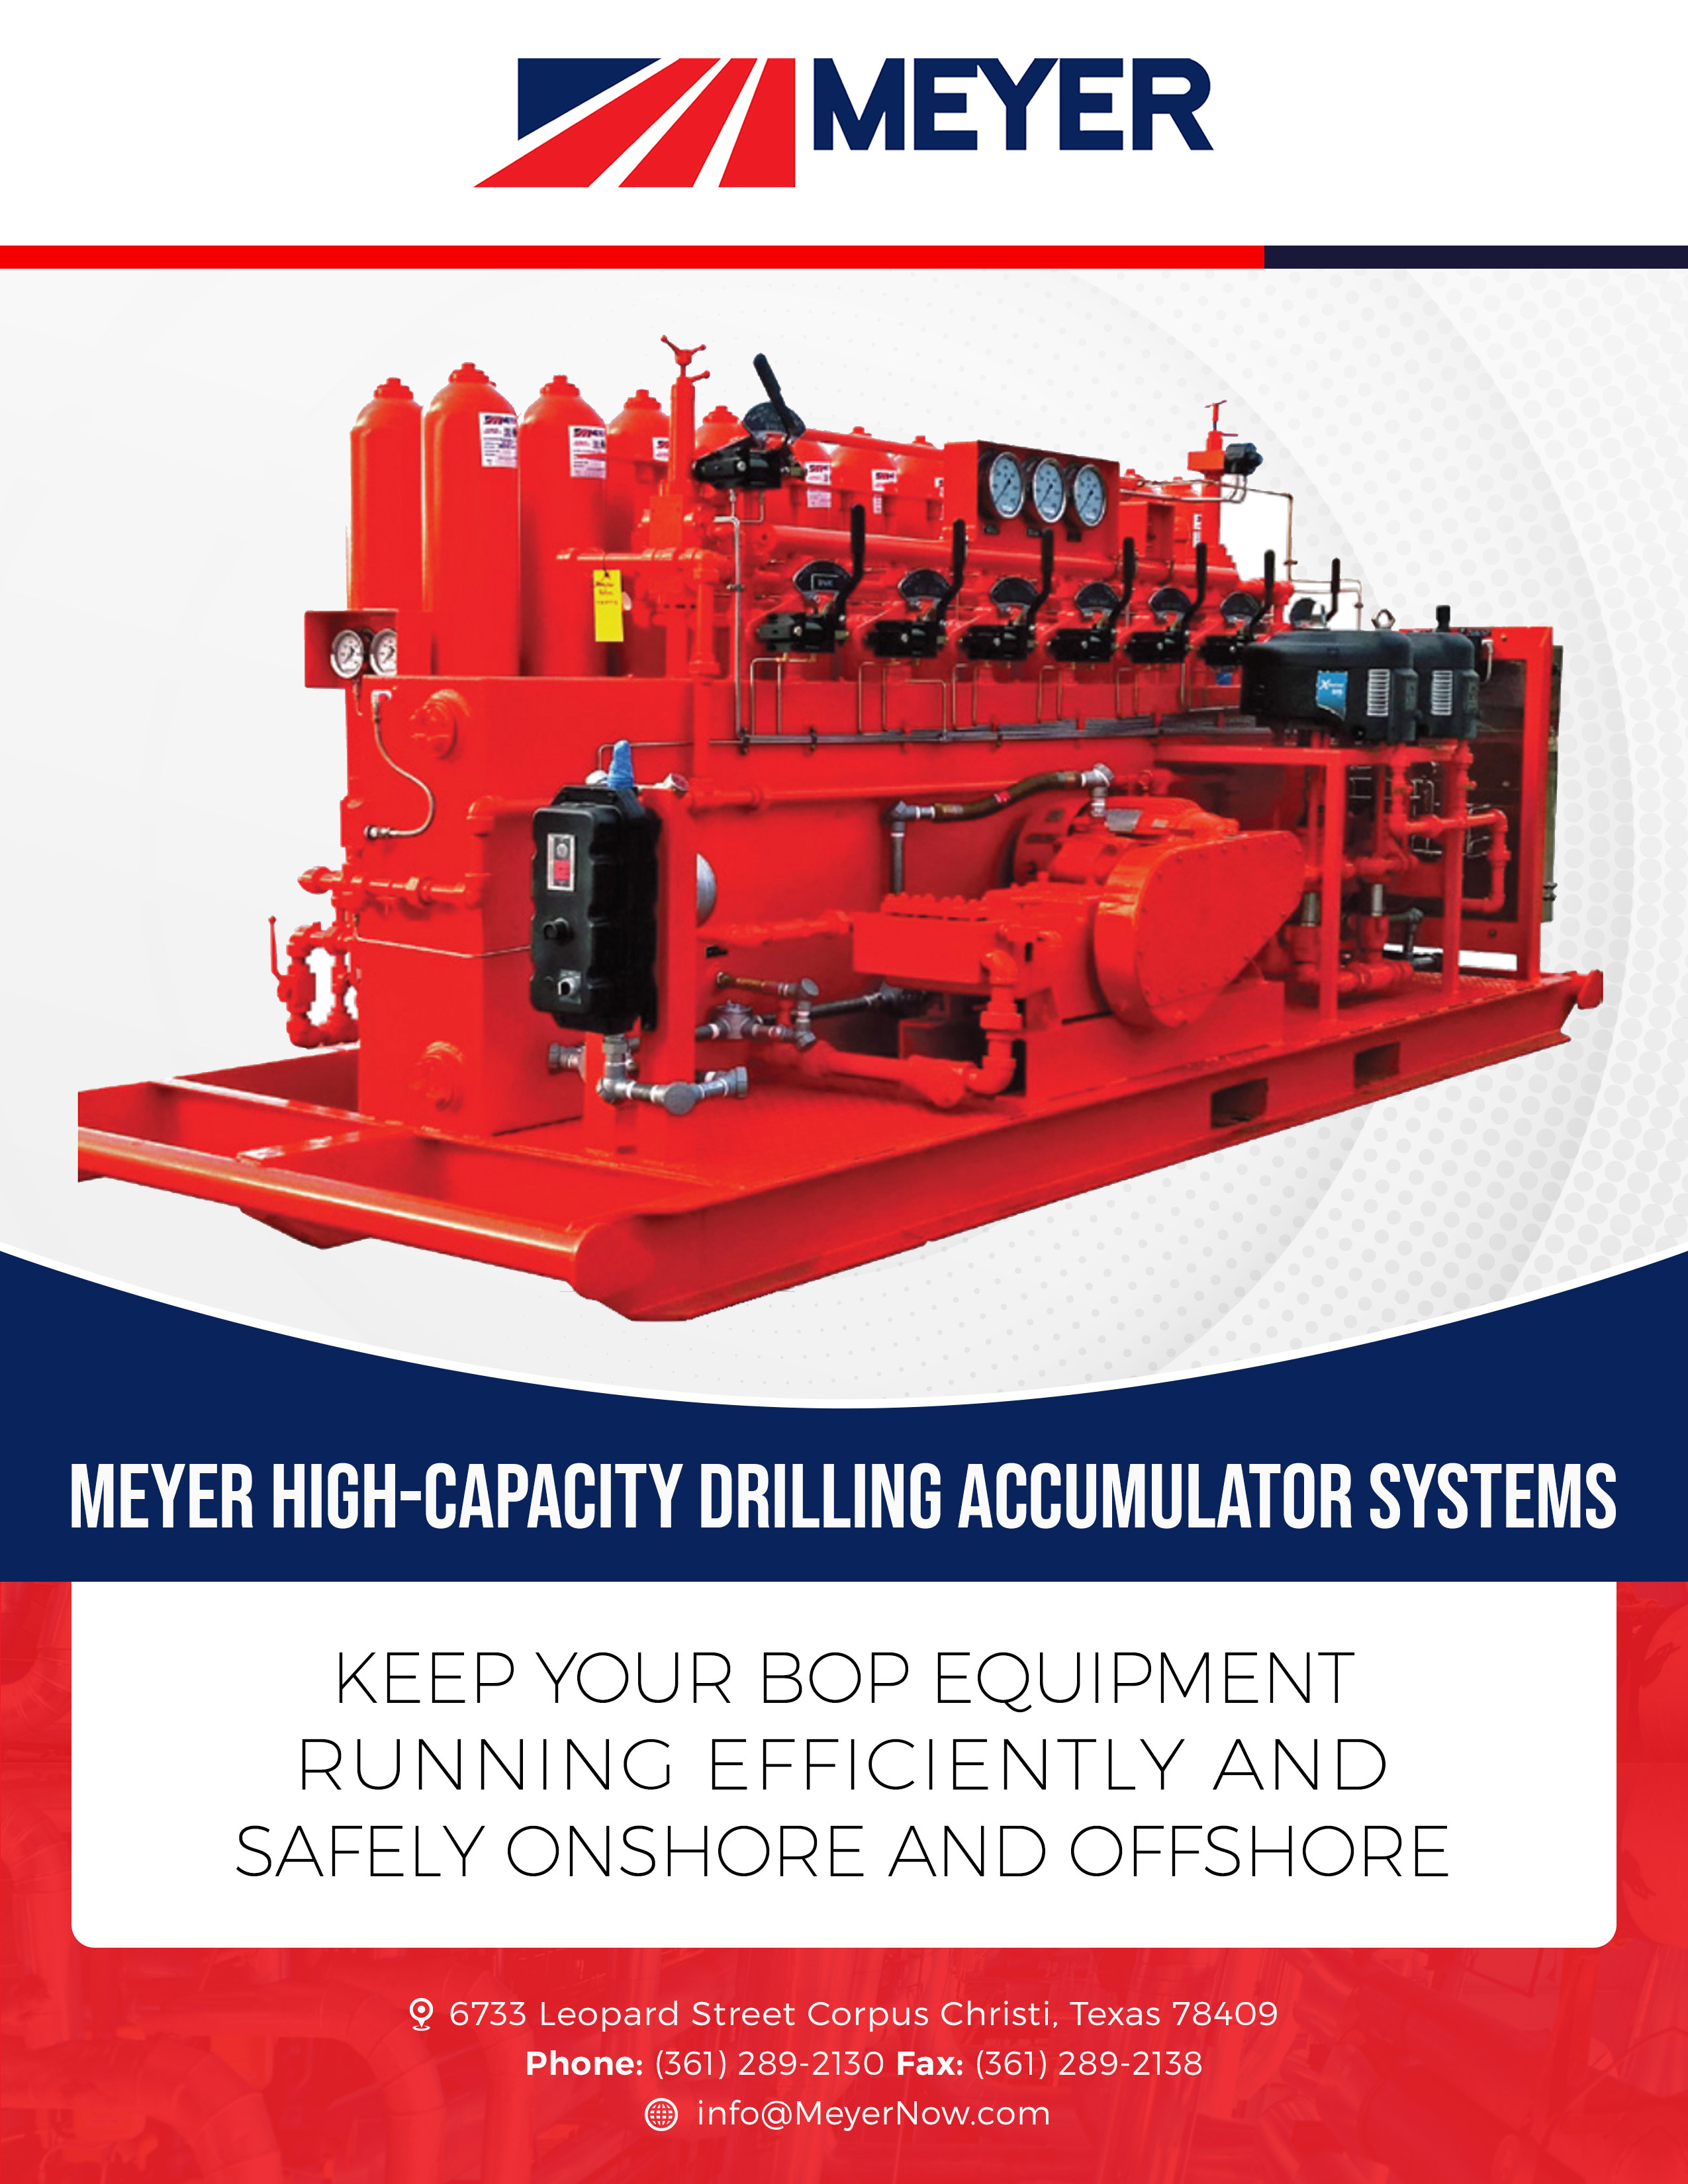 Reliable hydraulic power when you need it.